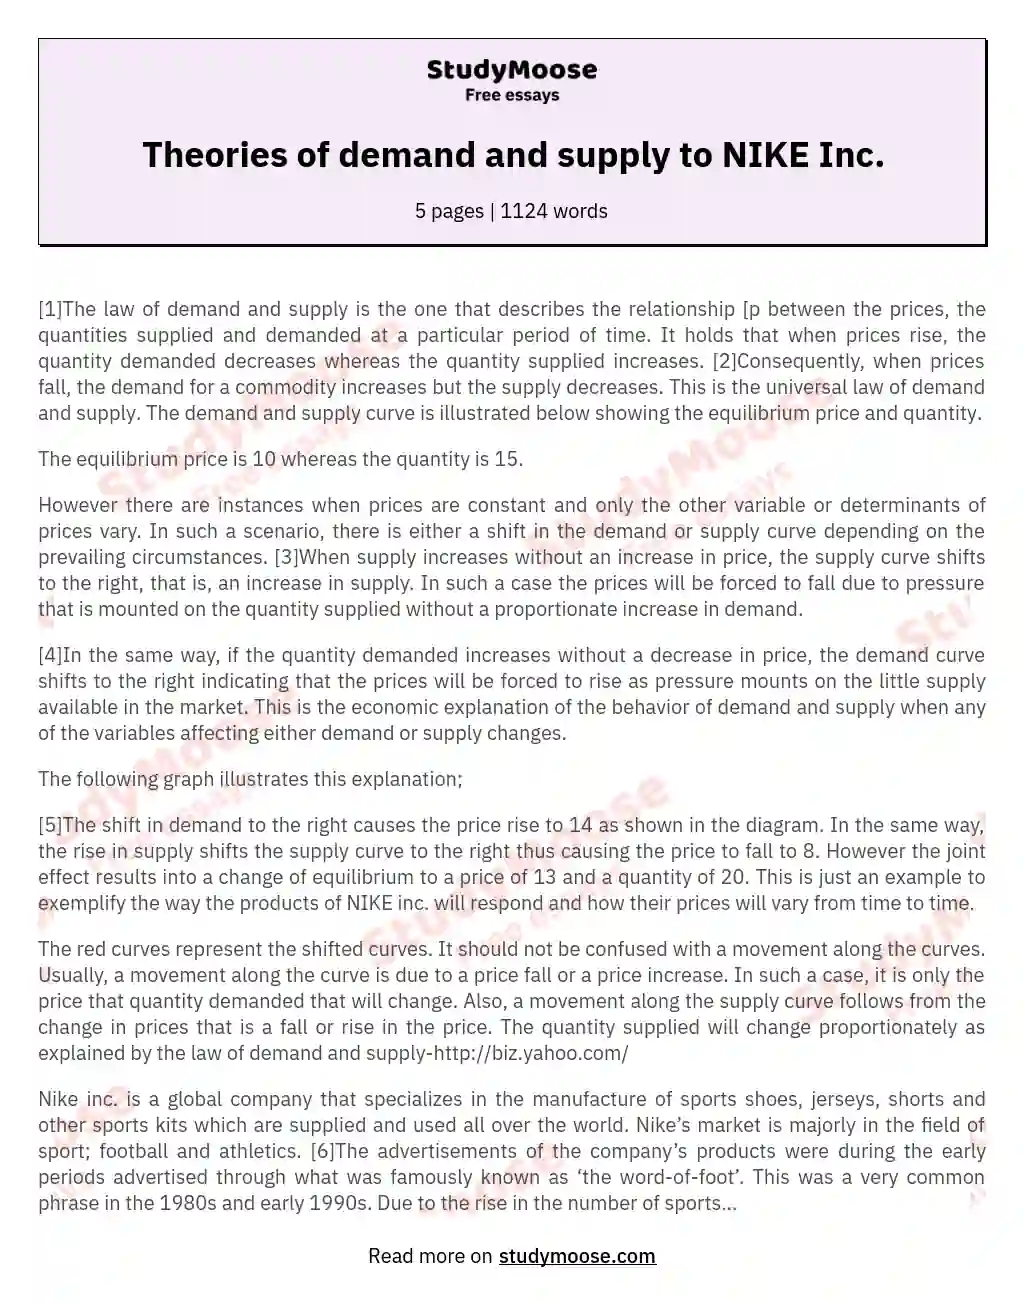 Theories of demand and supply to NIKE Inc. essay